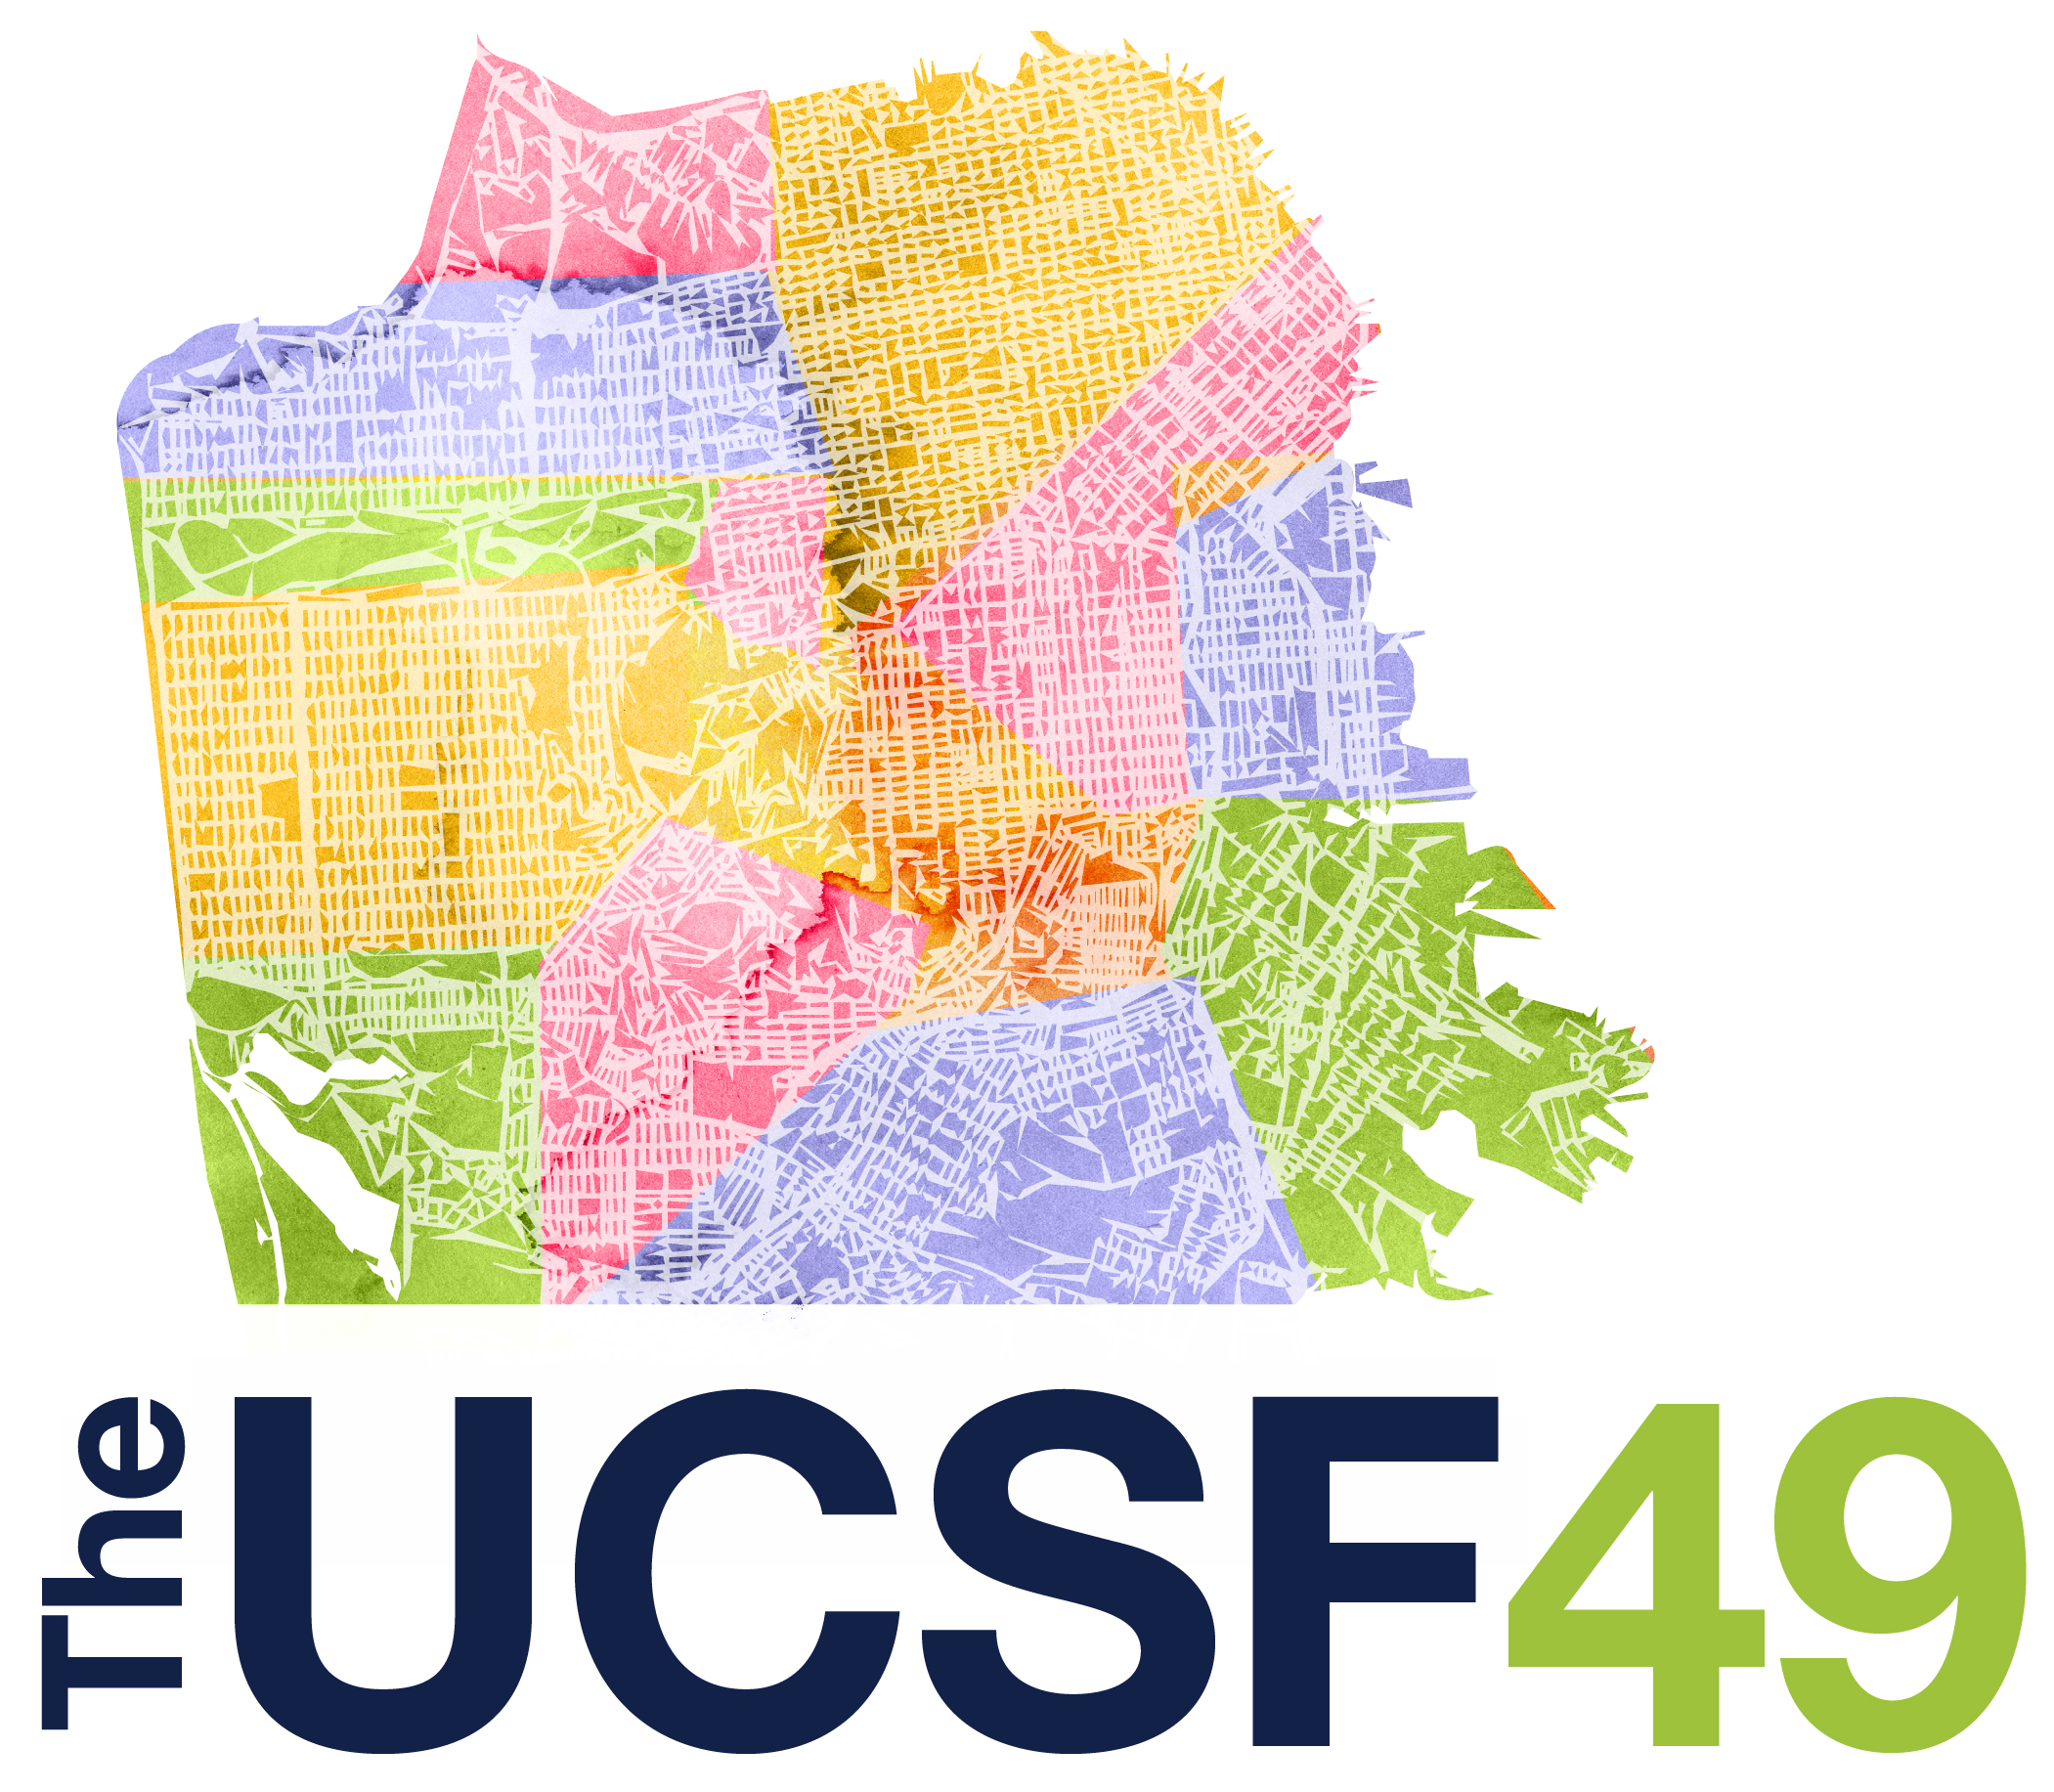 The UCSF 49